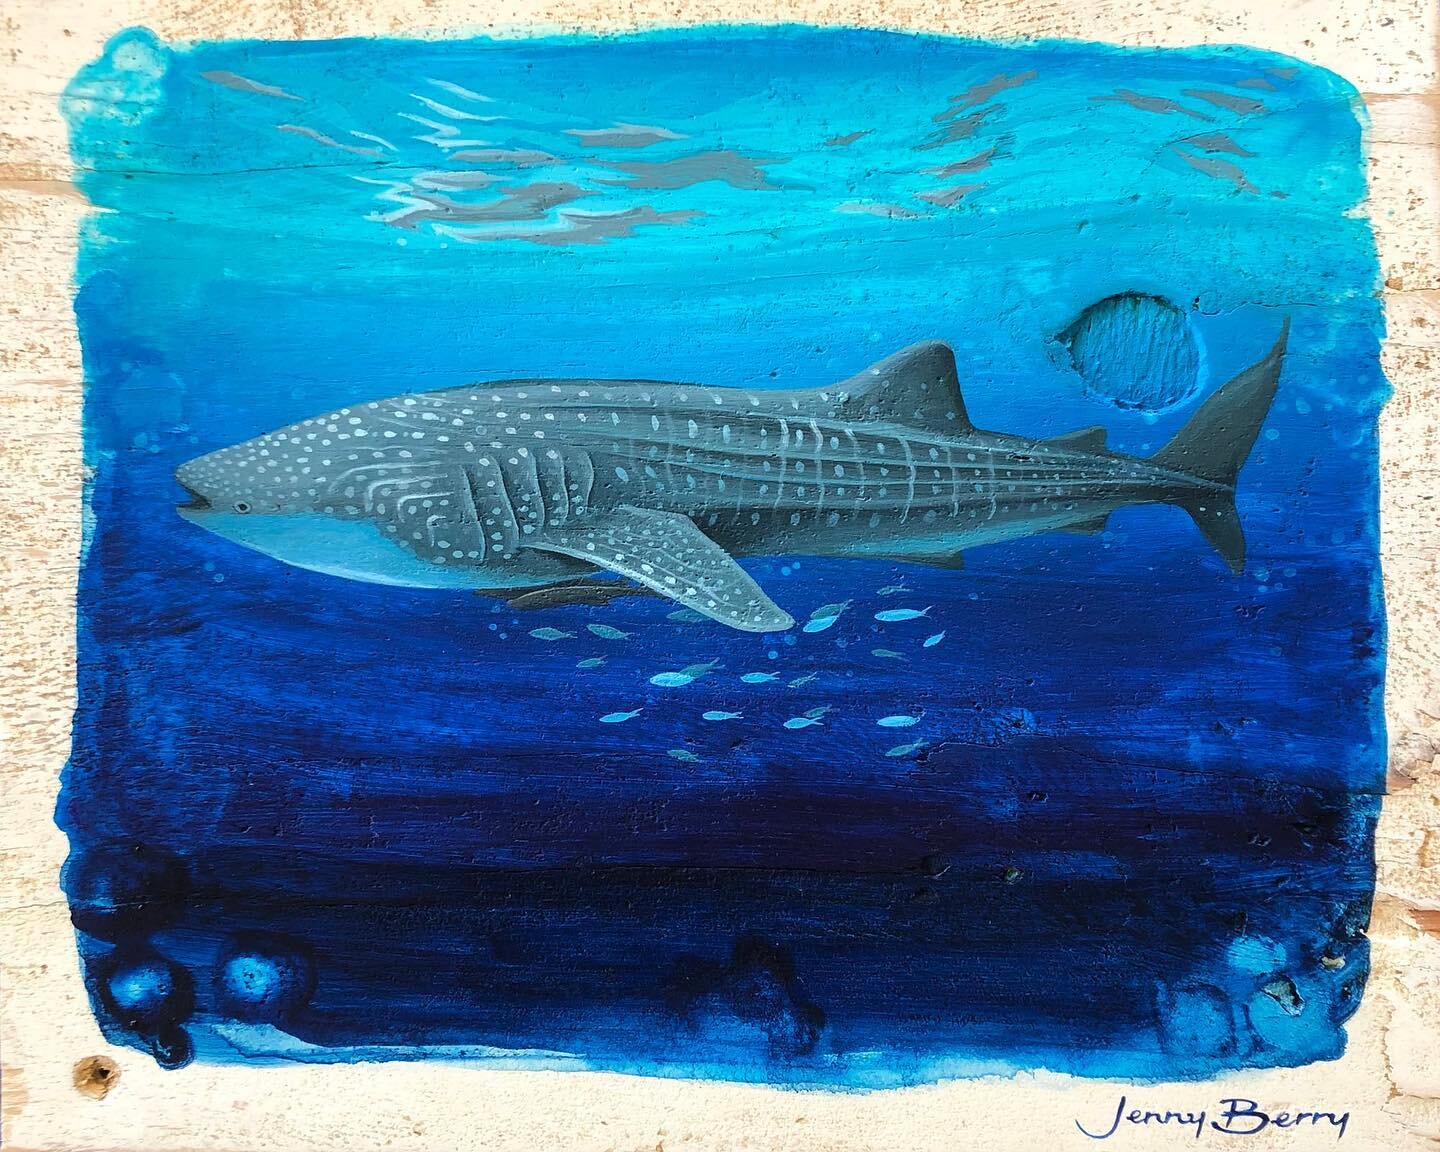 I&rsquo;ve donated this beautiful whale shark artwork to the Neurosurgical Research Foundation to raise funds for this important cause 💙 The online auction will begin on September 3rd so I&rsquo;ll share a link for you to view the catalogue of artwo